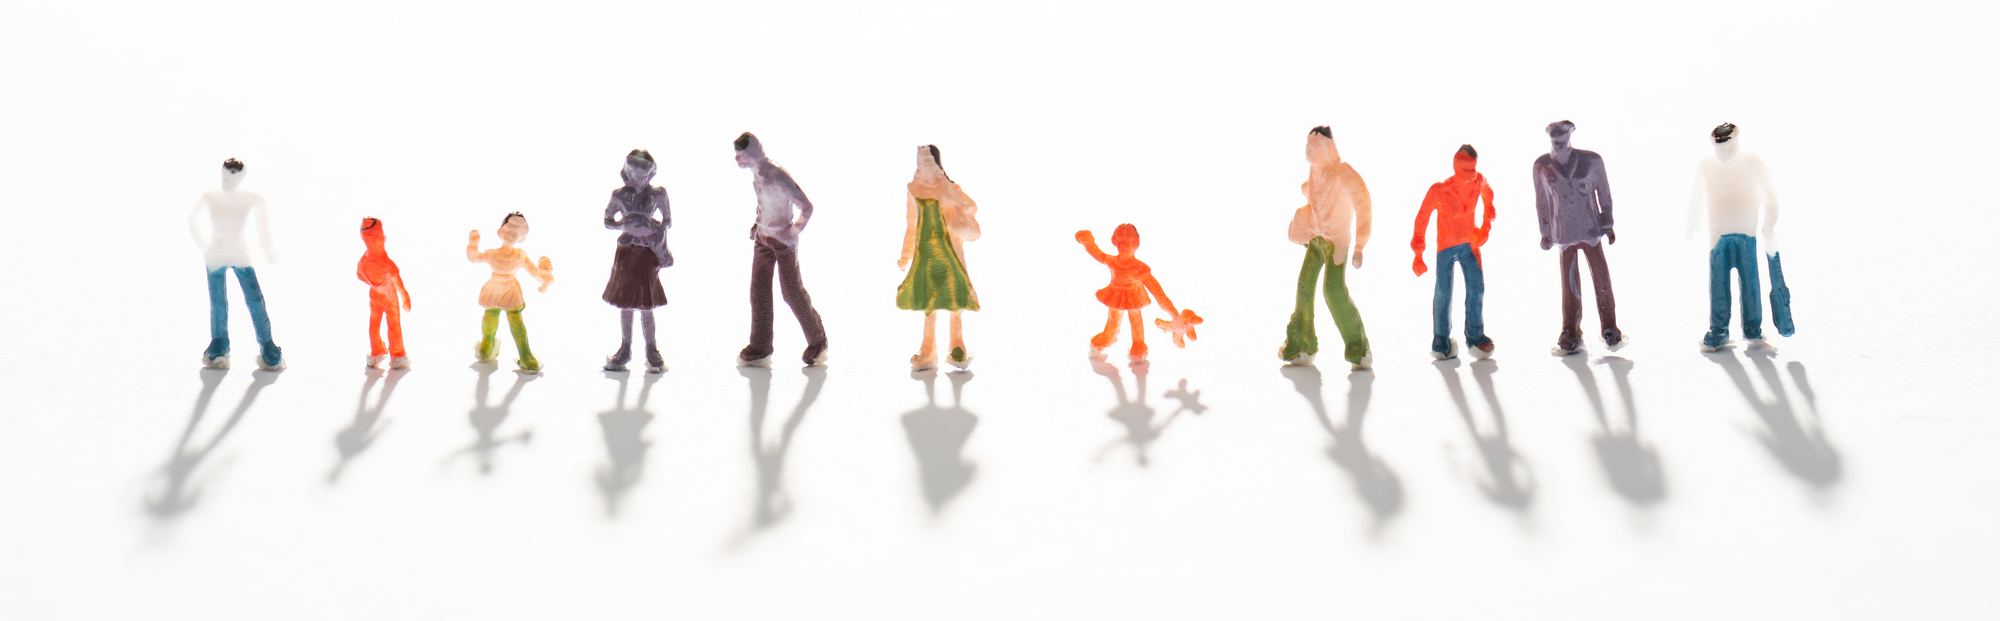 Panoramic shot of people figures on white surface with shadow